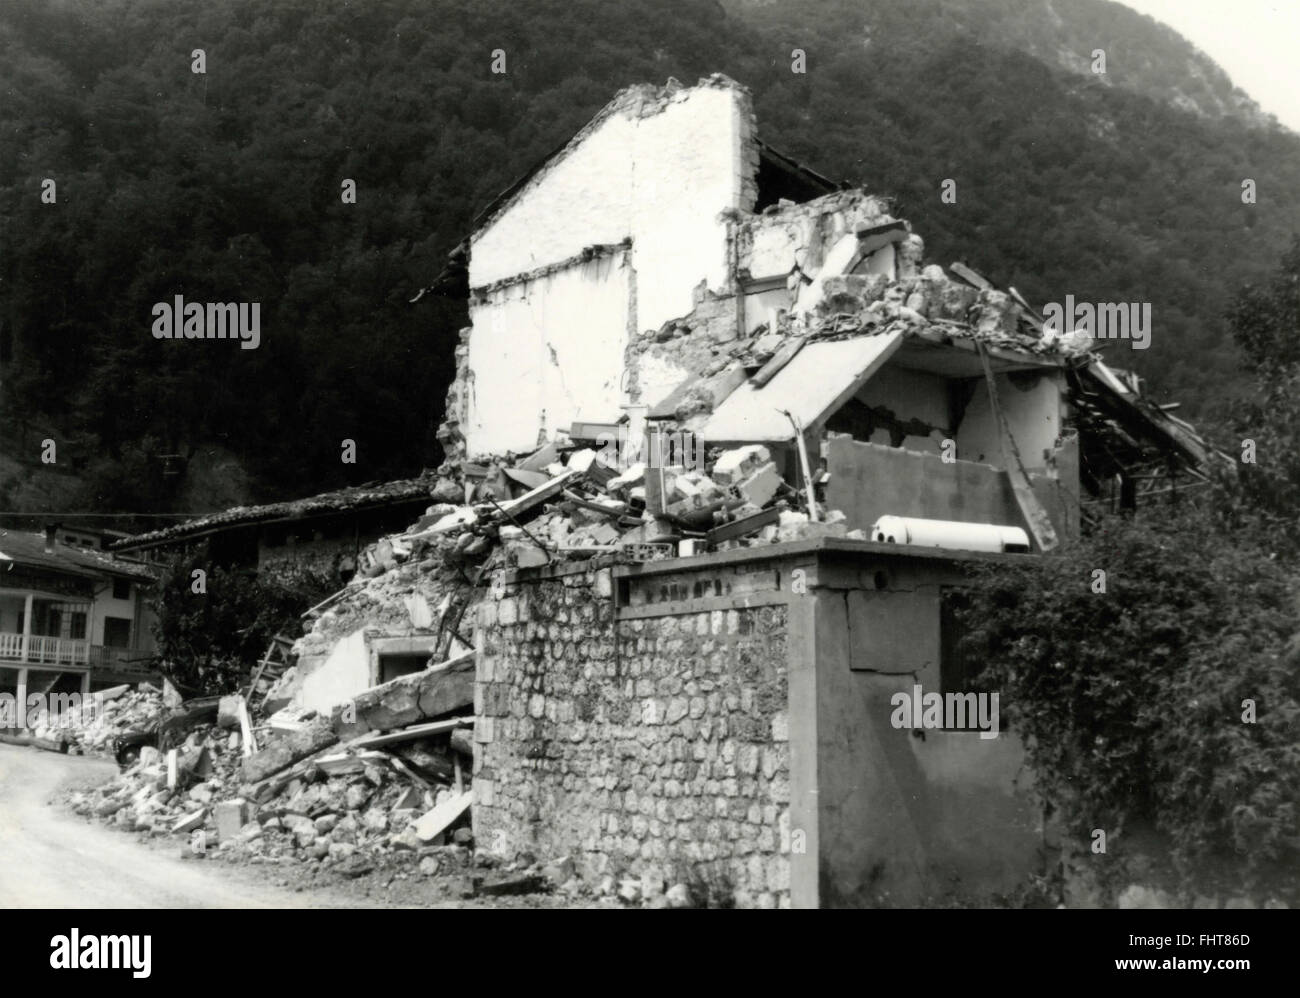 Earthquake in Friuli, Italy 1976: Damage to a building Stock Photo